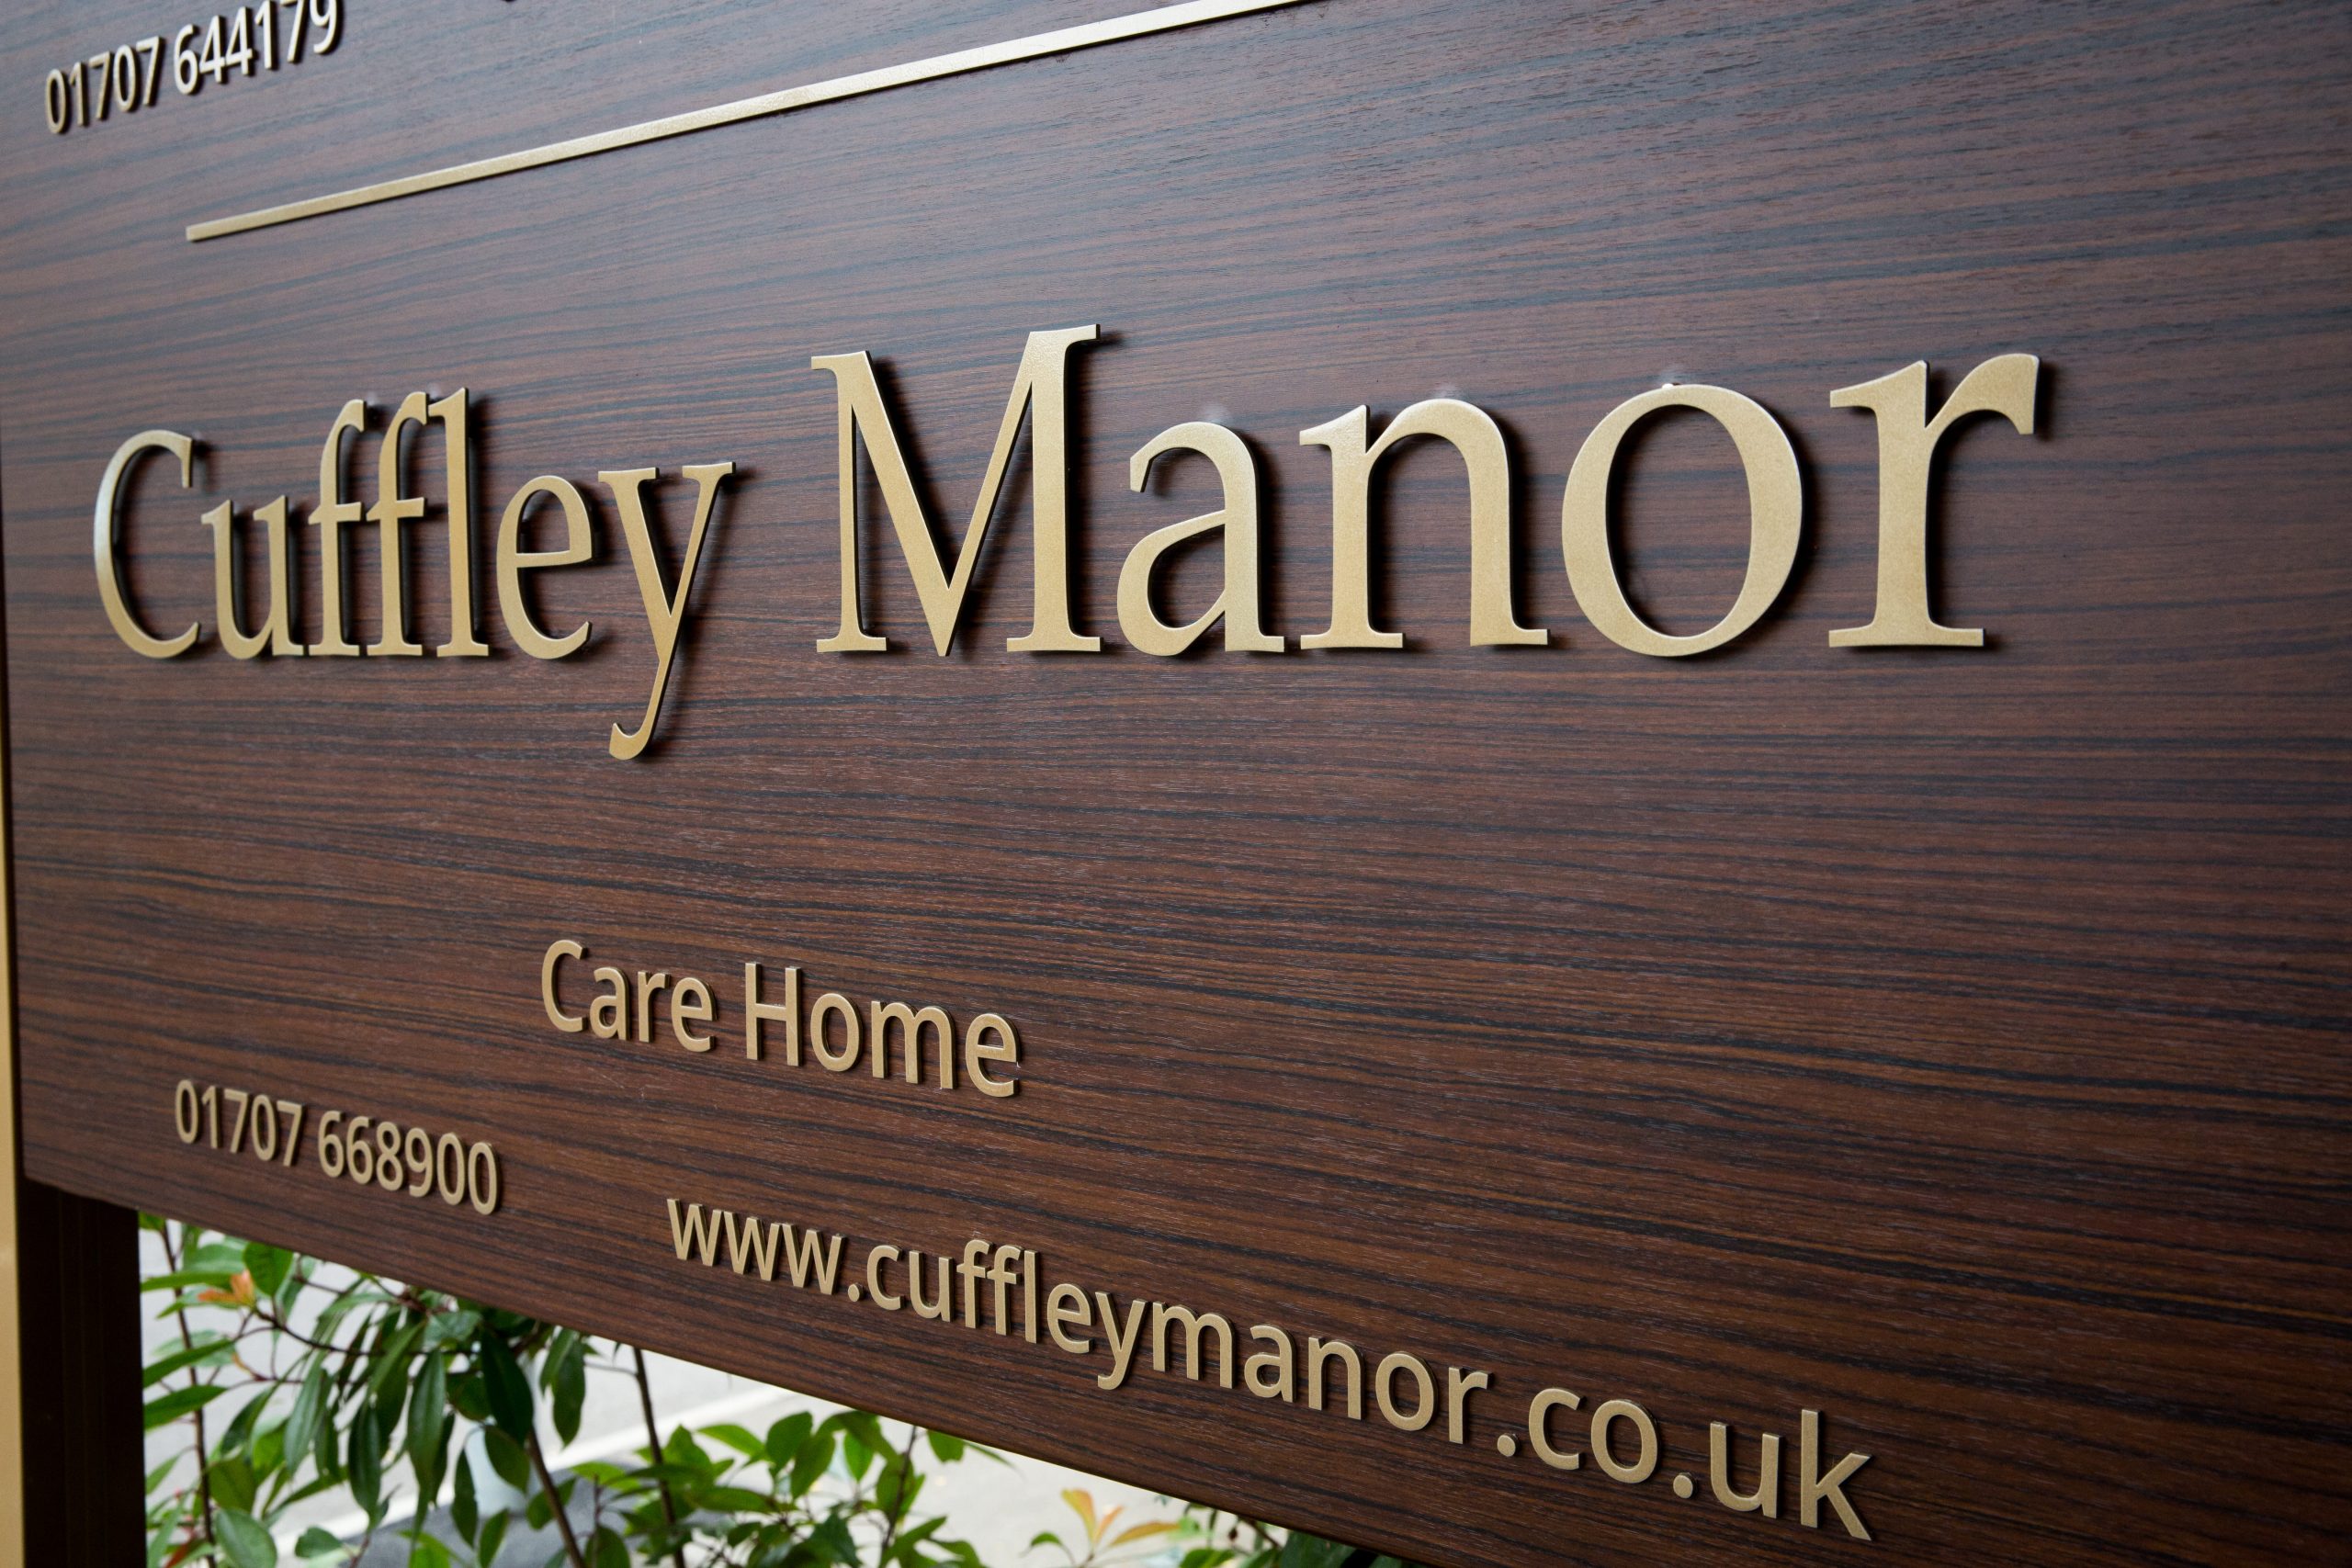 Cuffley Manor Care home in Potters bar Hertfordshire Signage